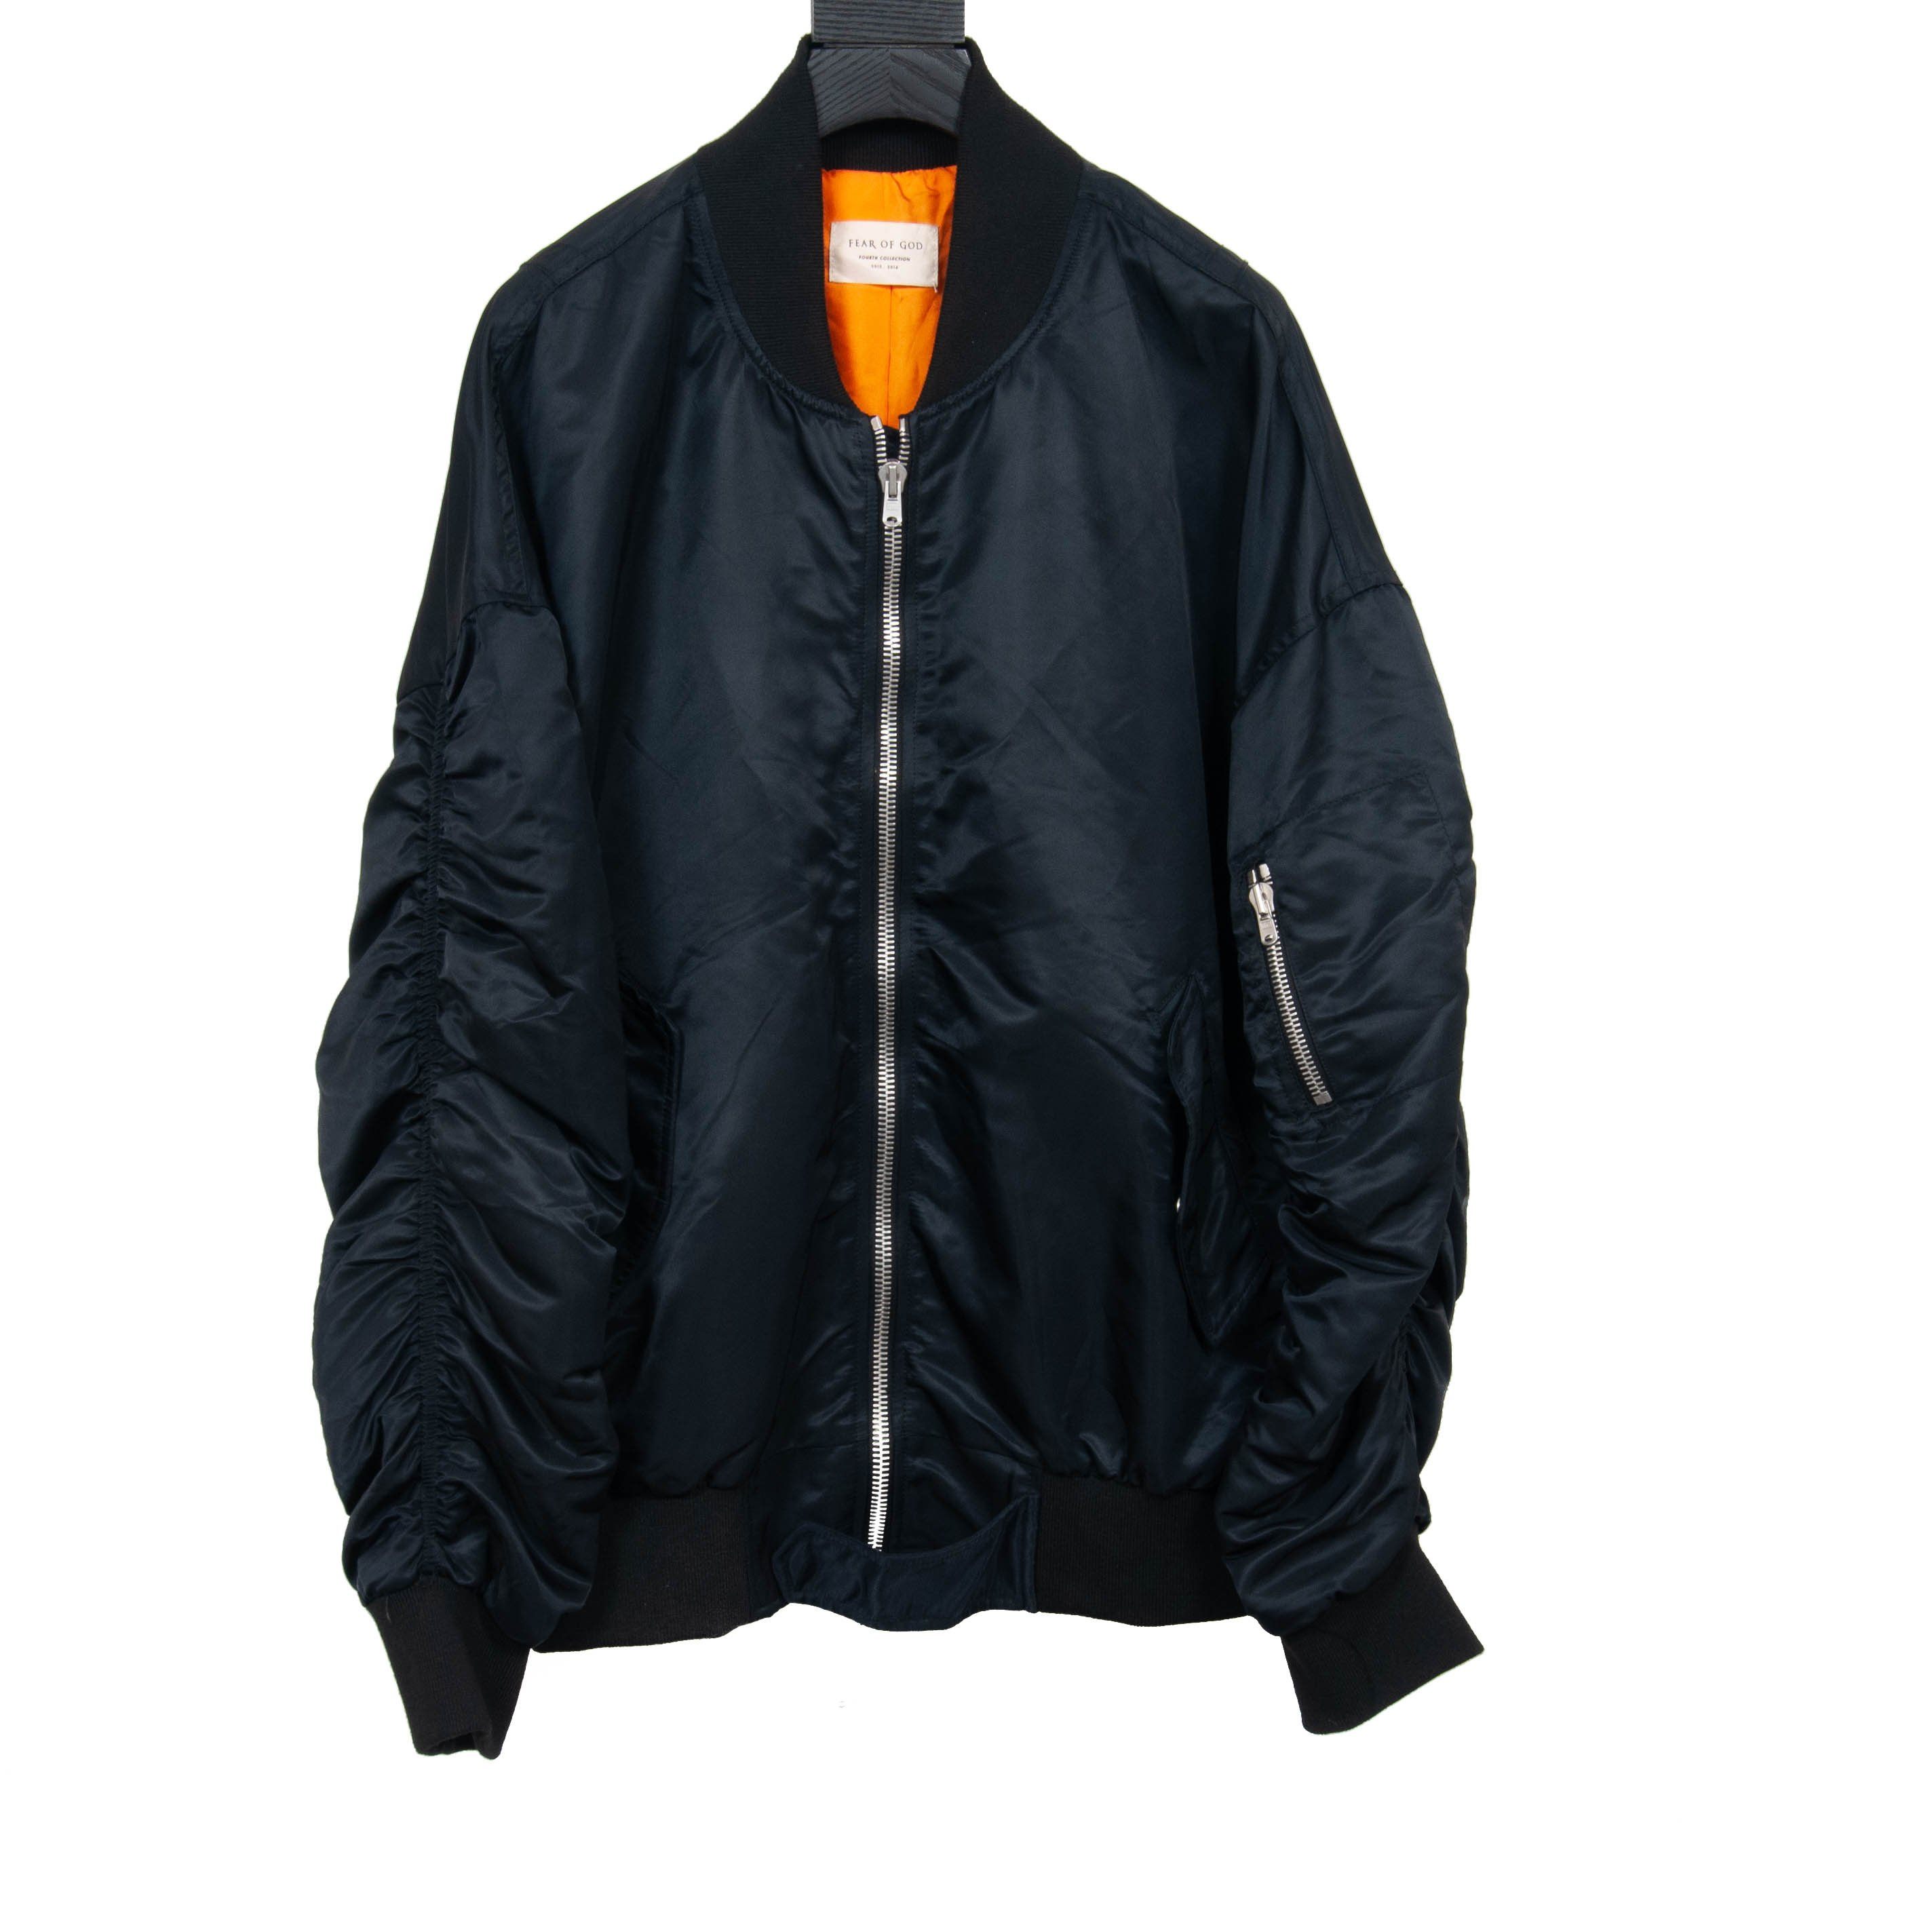 Fourth Collection Bomber Jacket